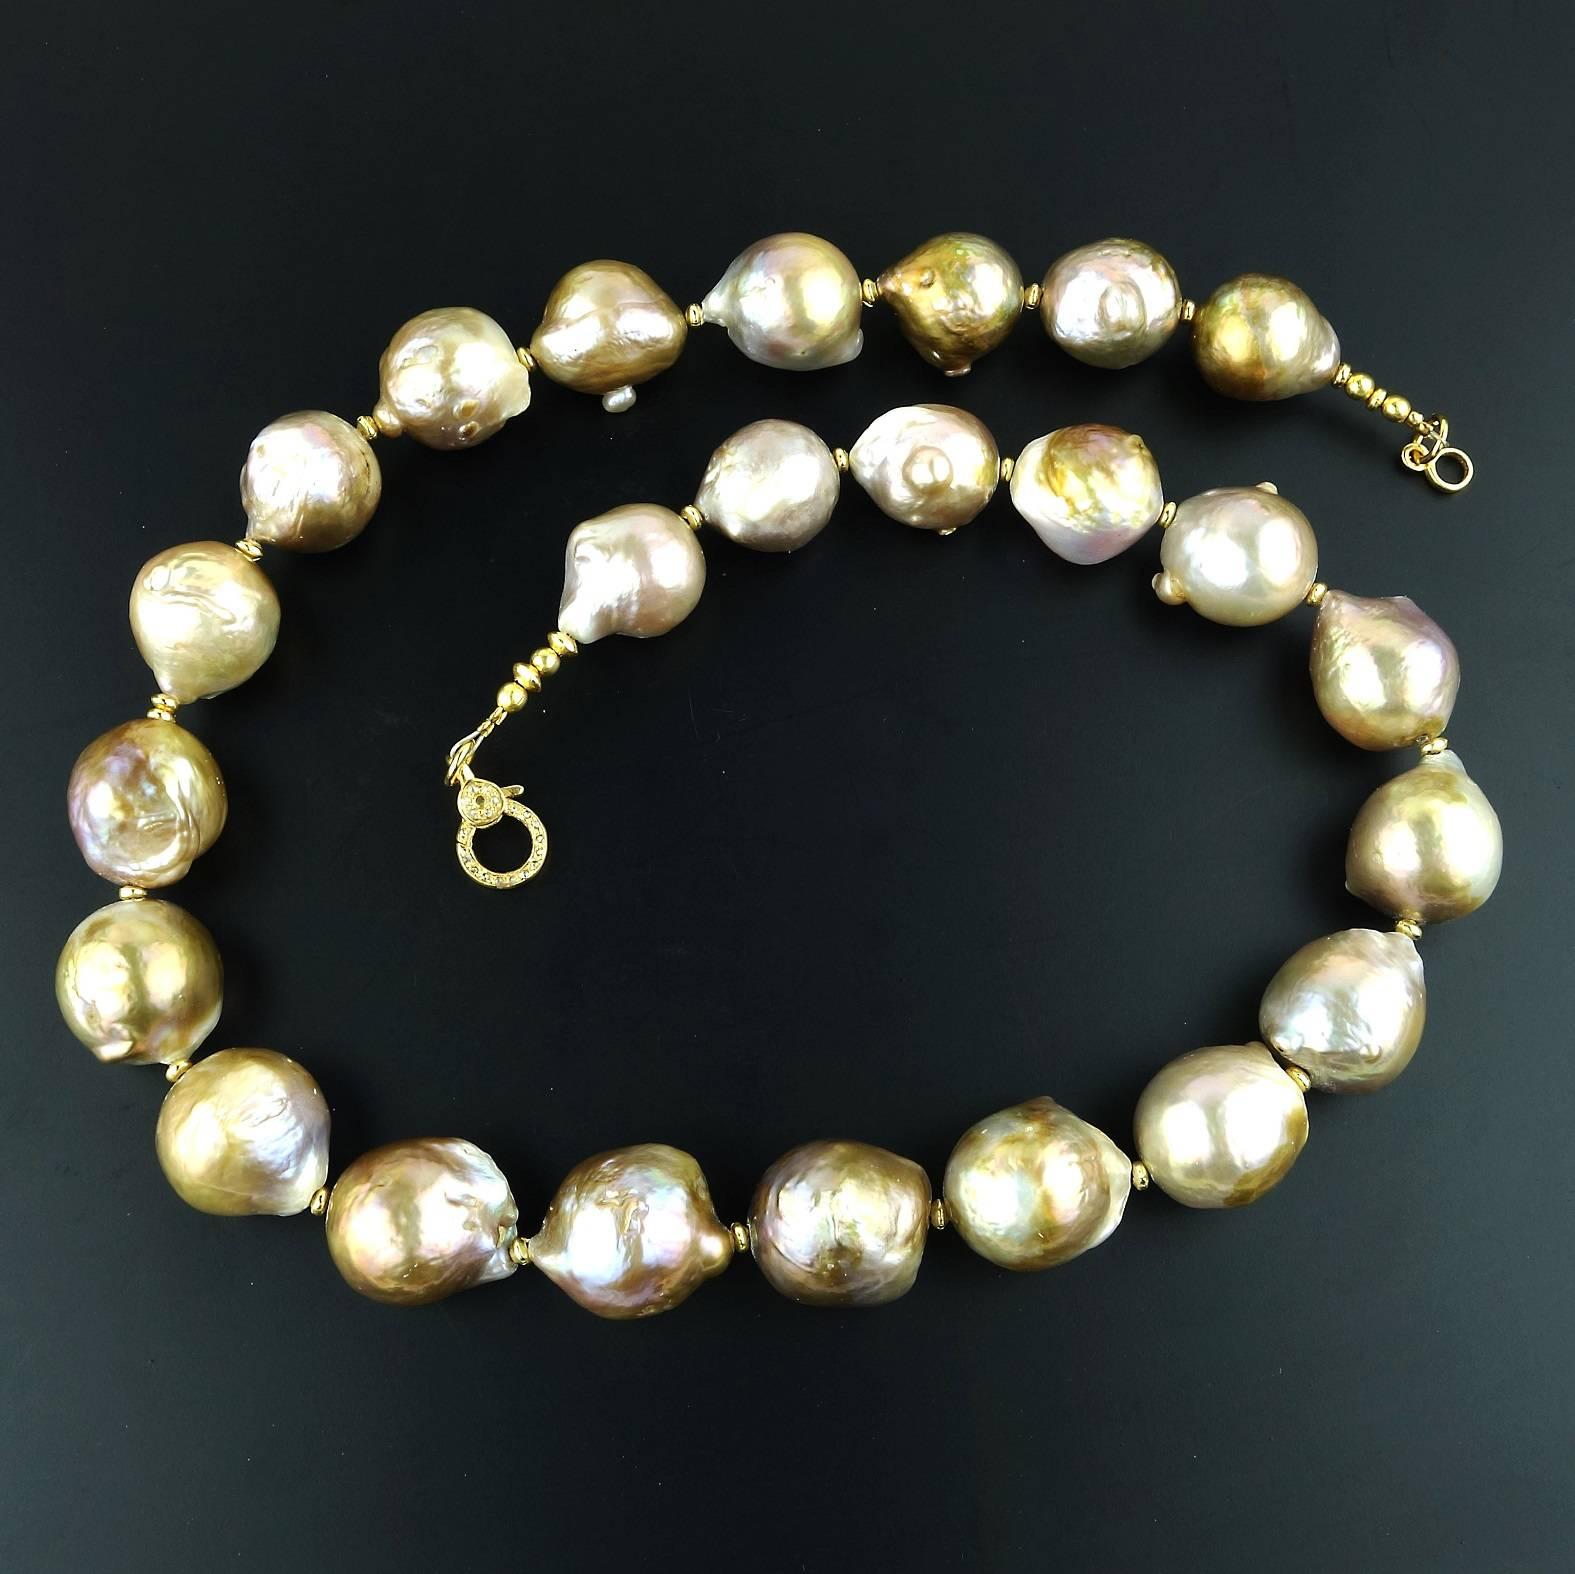 Glamorous Iridescent Wrinkle Pearl Necklace from Gemjunky 5